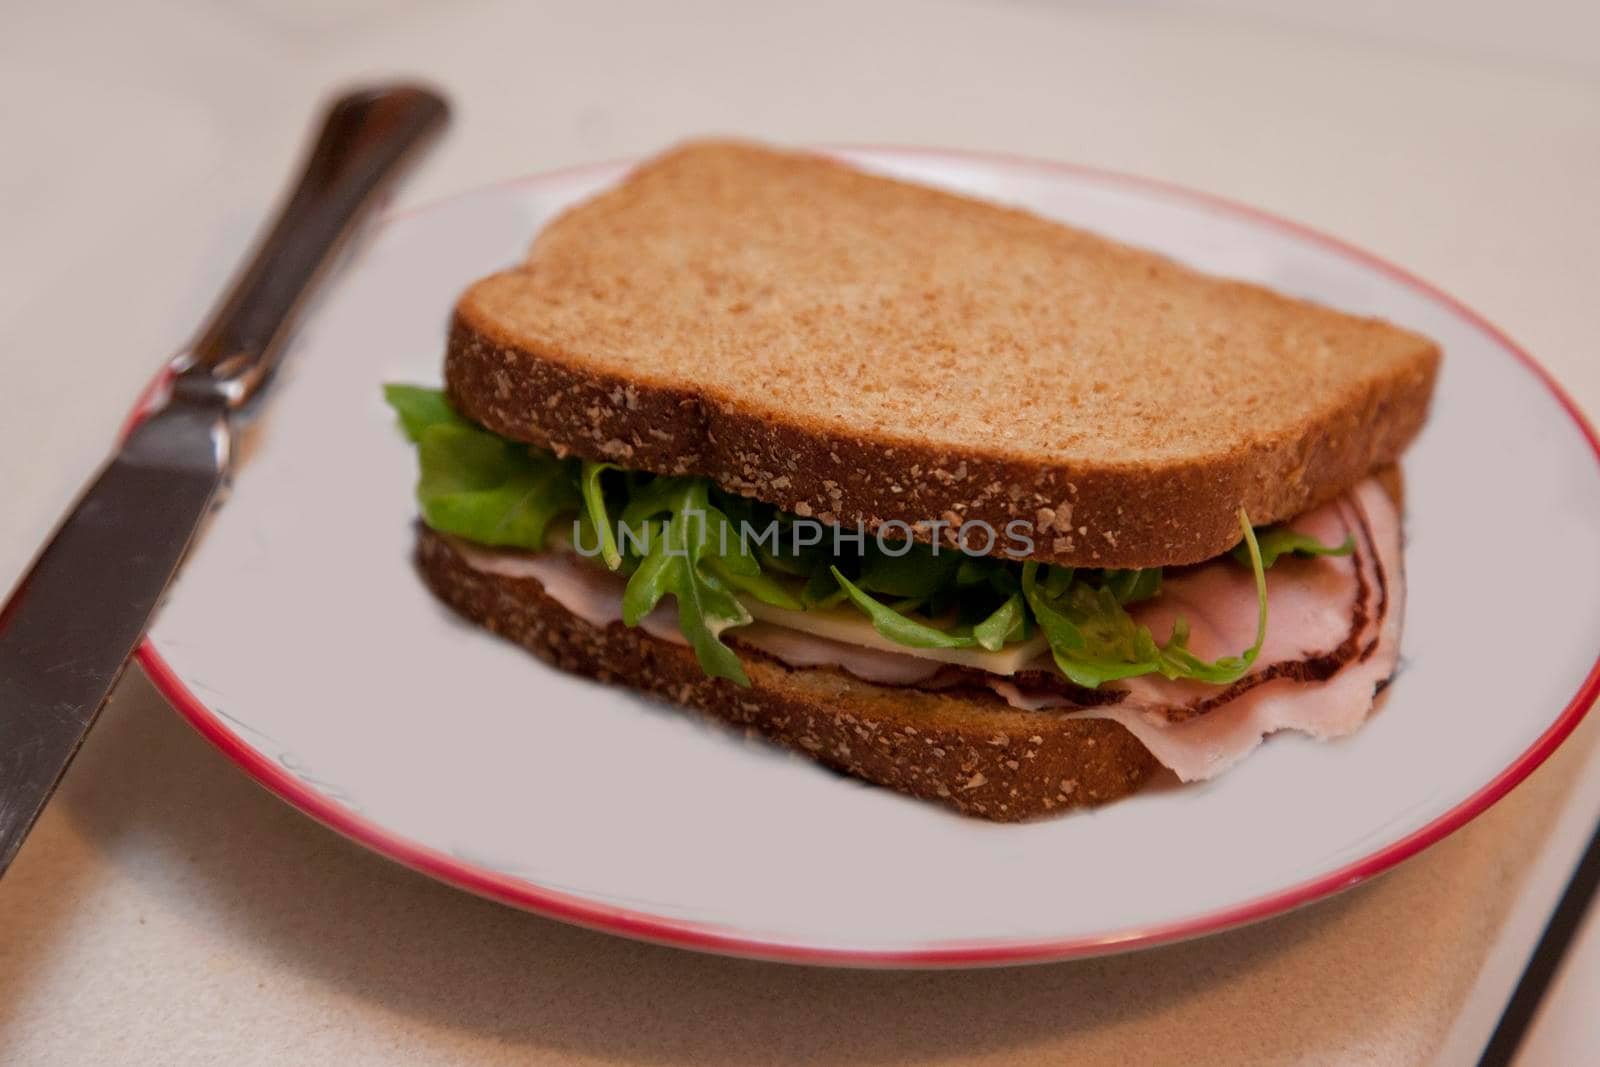  Delicious looking brown bread sandwich on a plate for lunch